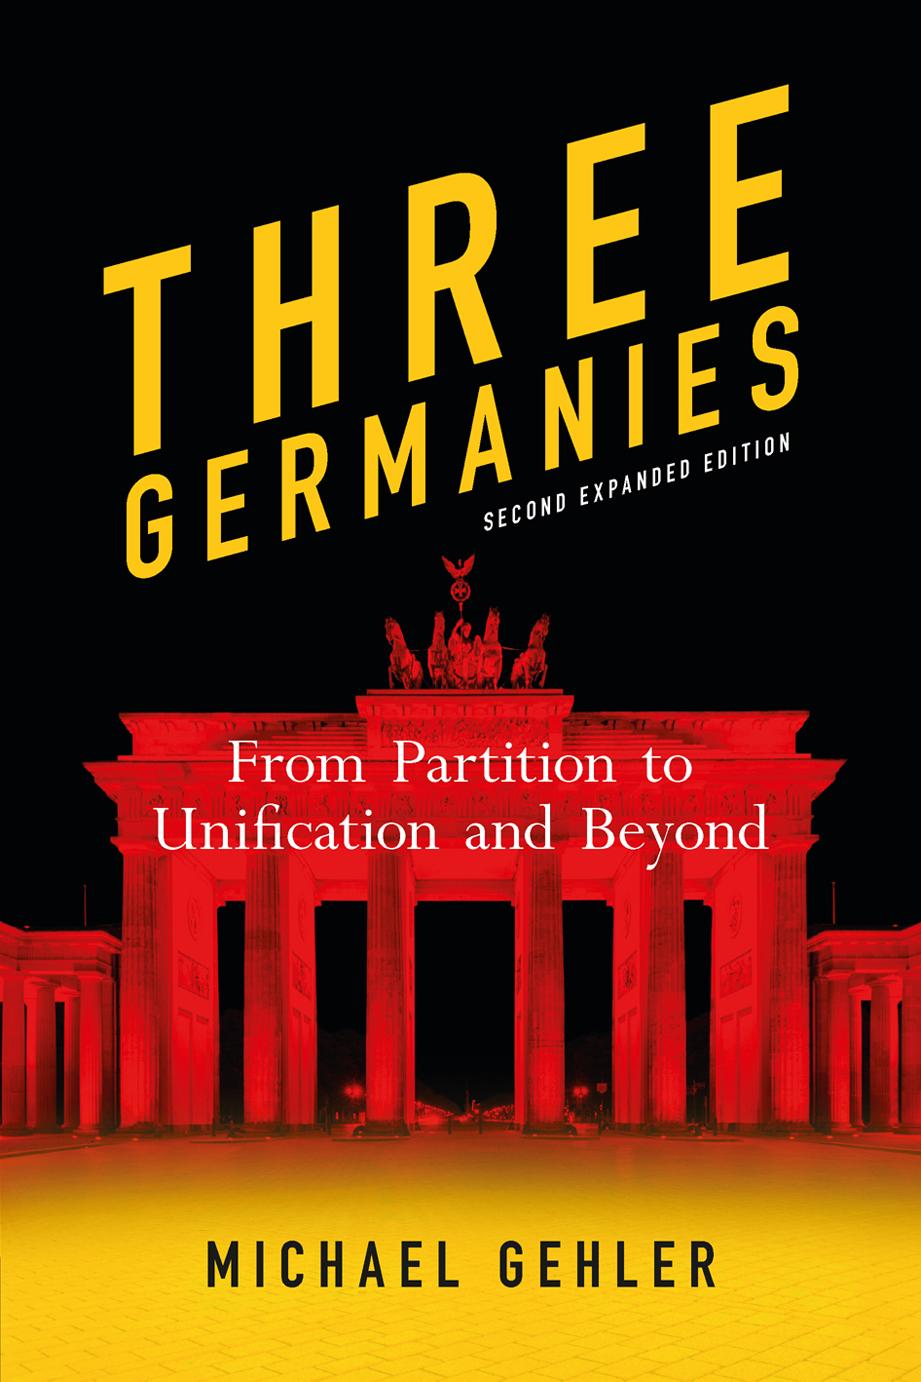 Three Germanies: From Partition to Unification and Beyond by Michael Gehler